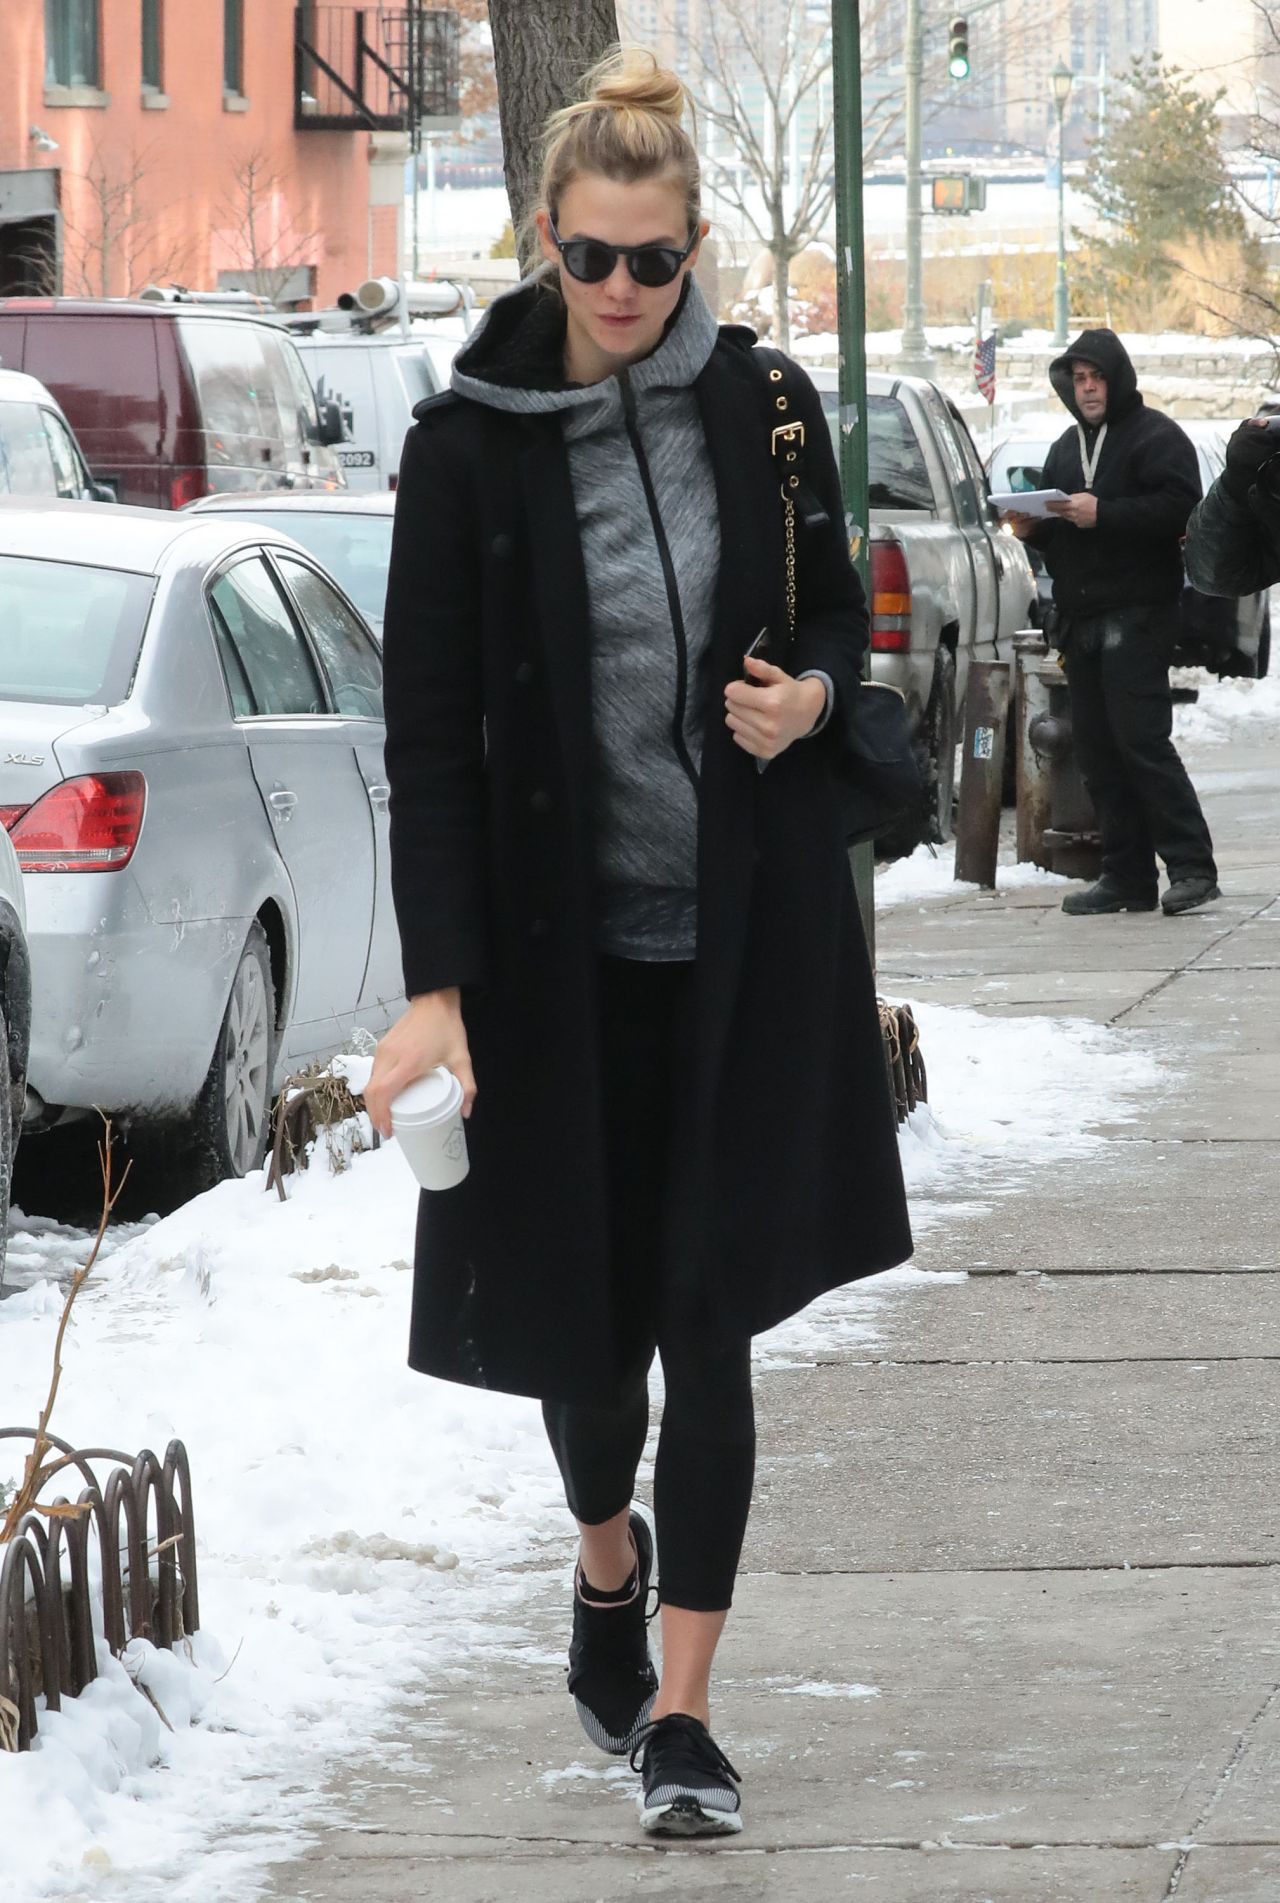 Karlie Kloss - Hits the Gym For a Morning Workout Session in NYC 1/9 ...